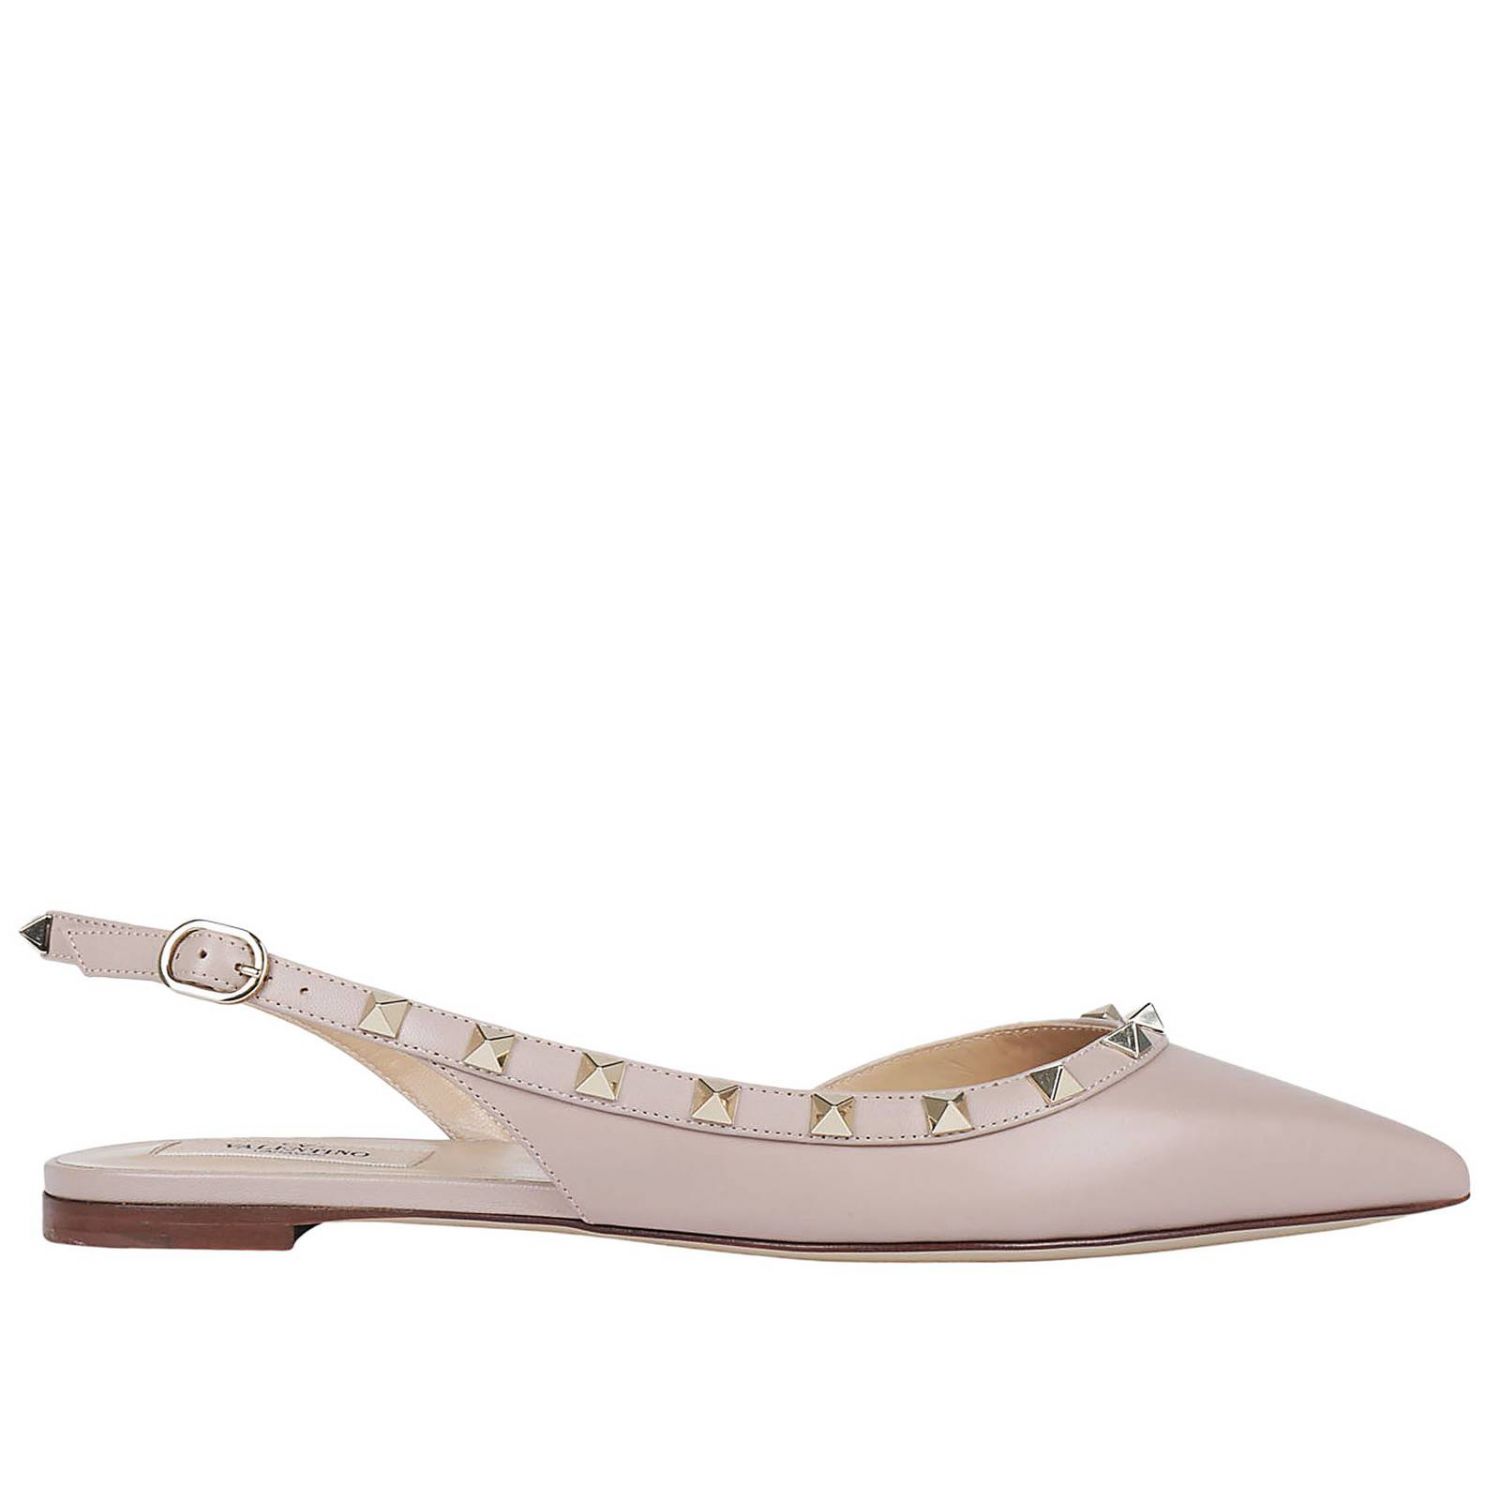 fuzzy Medarbejder skud VALENTINO GARAVANI: Valentino Rockstud Slingback ballerina flat in leather  and nappa with metal studs | Ballet Flats Valentino Garavani Women Dust | Ballet  Flats Valentino Garavani QW1S0H13 VOD GIGLIO.COM